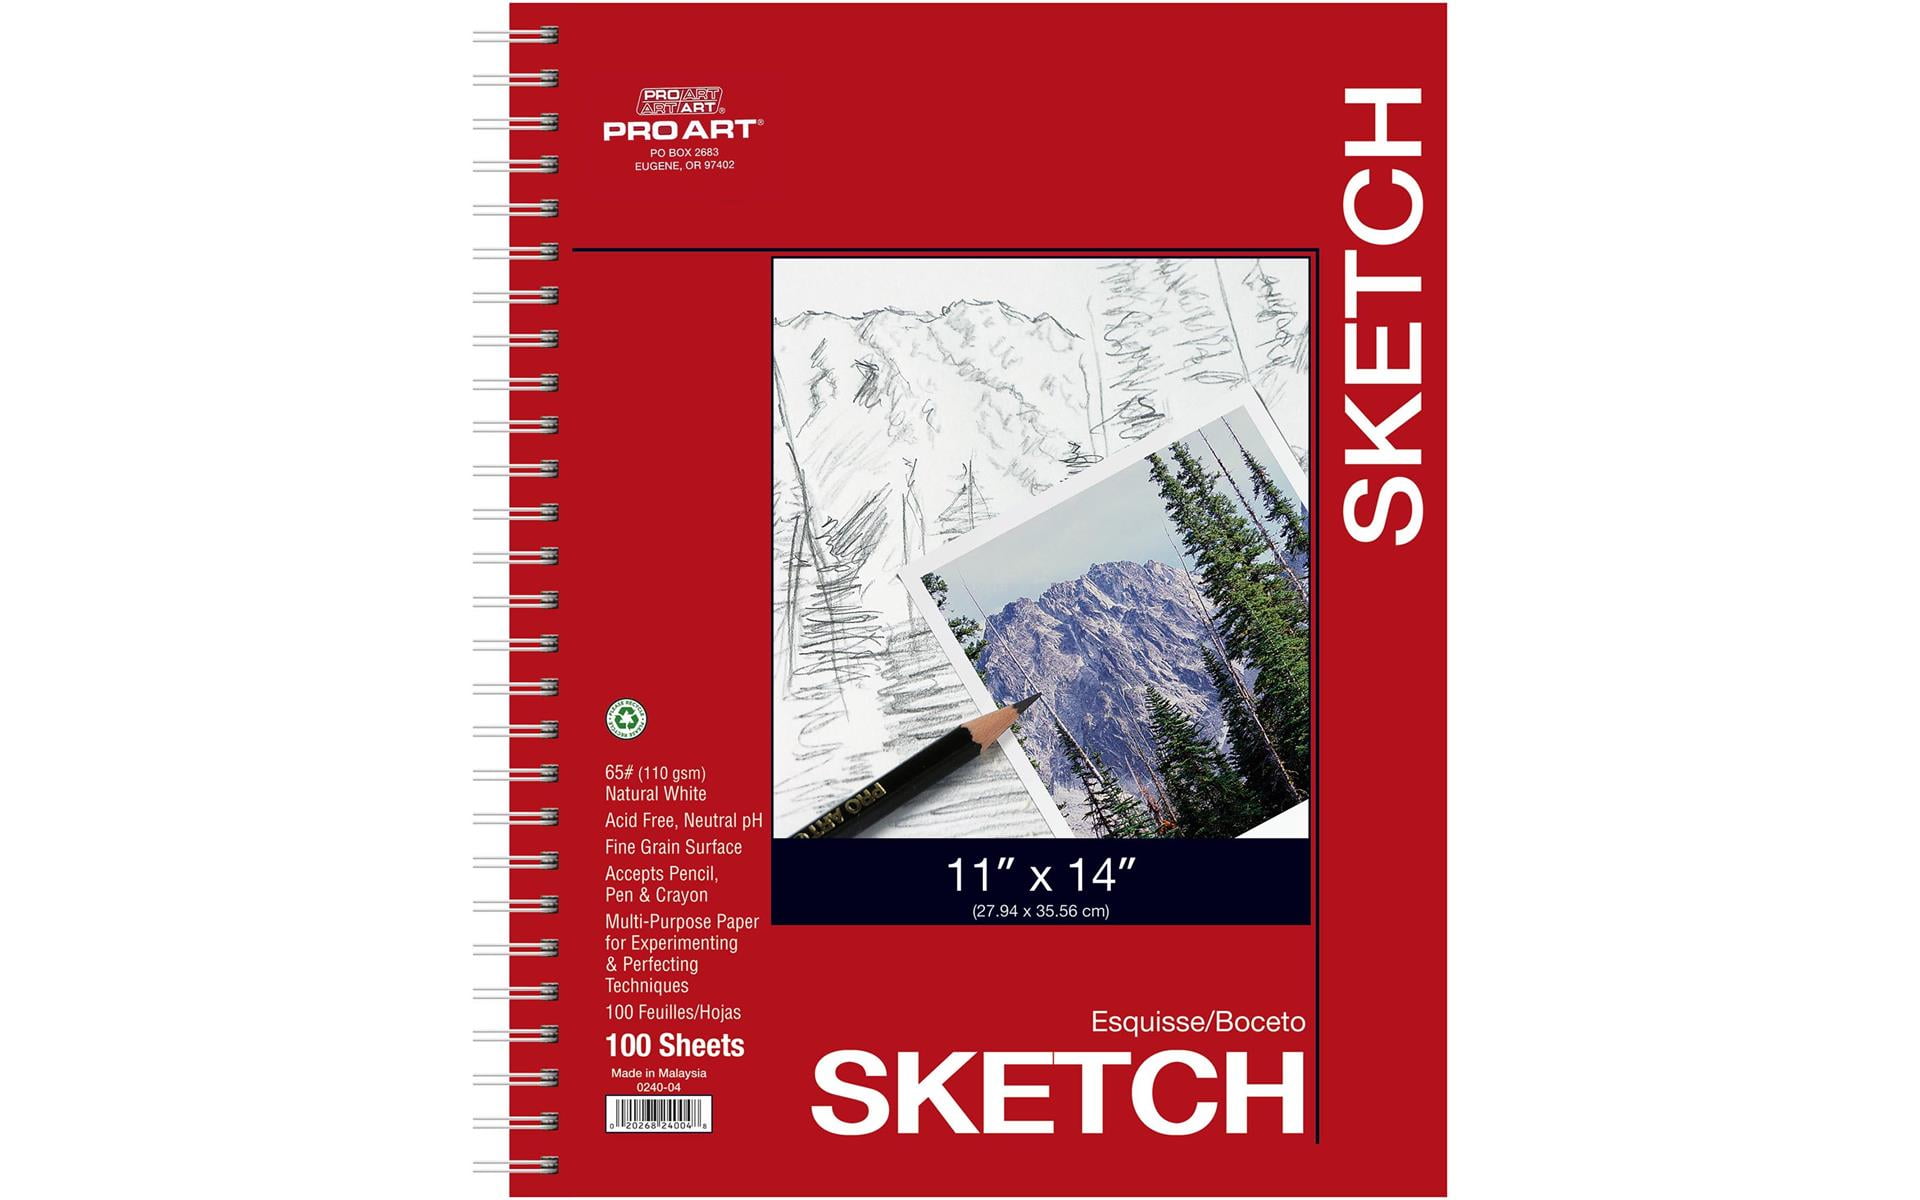 TOP-Pindu Spiral Sketchbook Pad, Art Drawing Book, 120 Pages/ 60 Sheets 140gsm (A4)